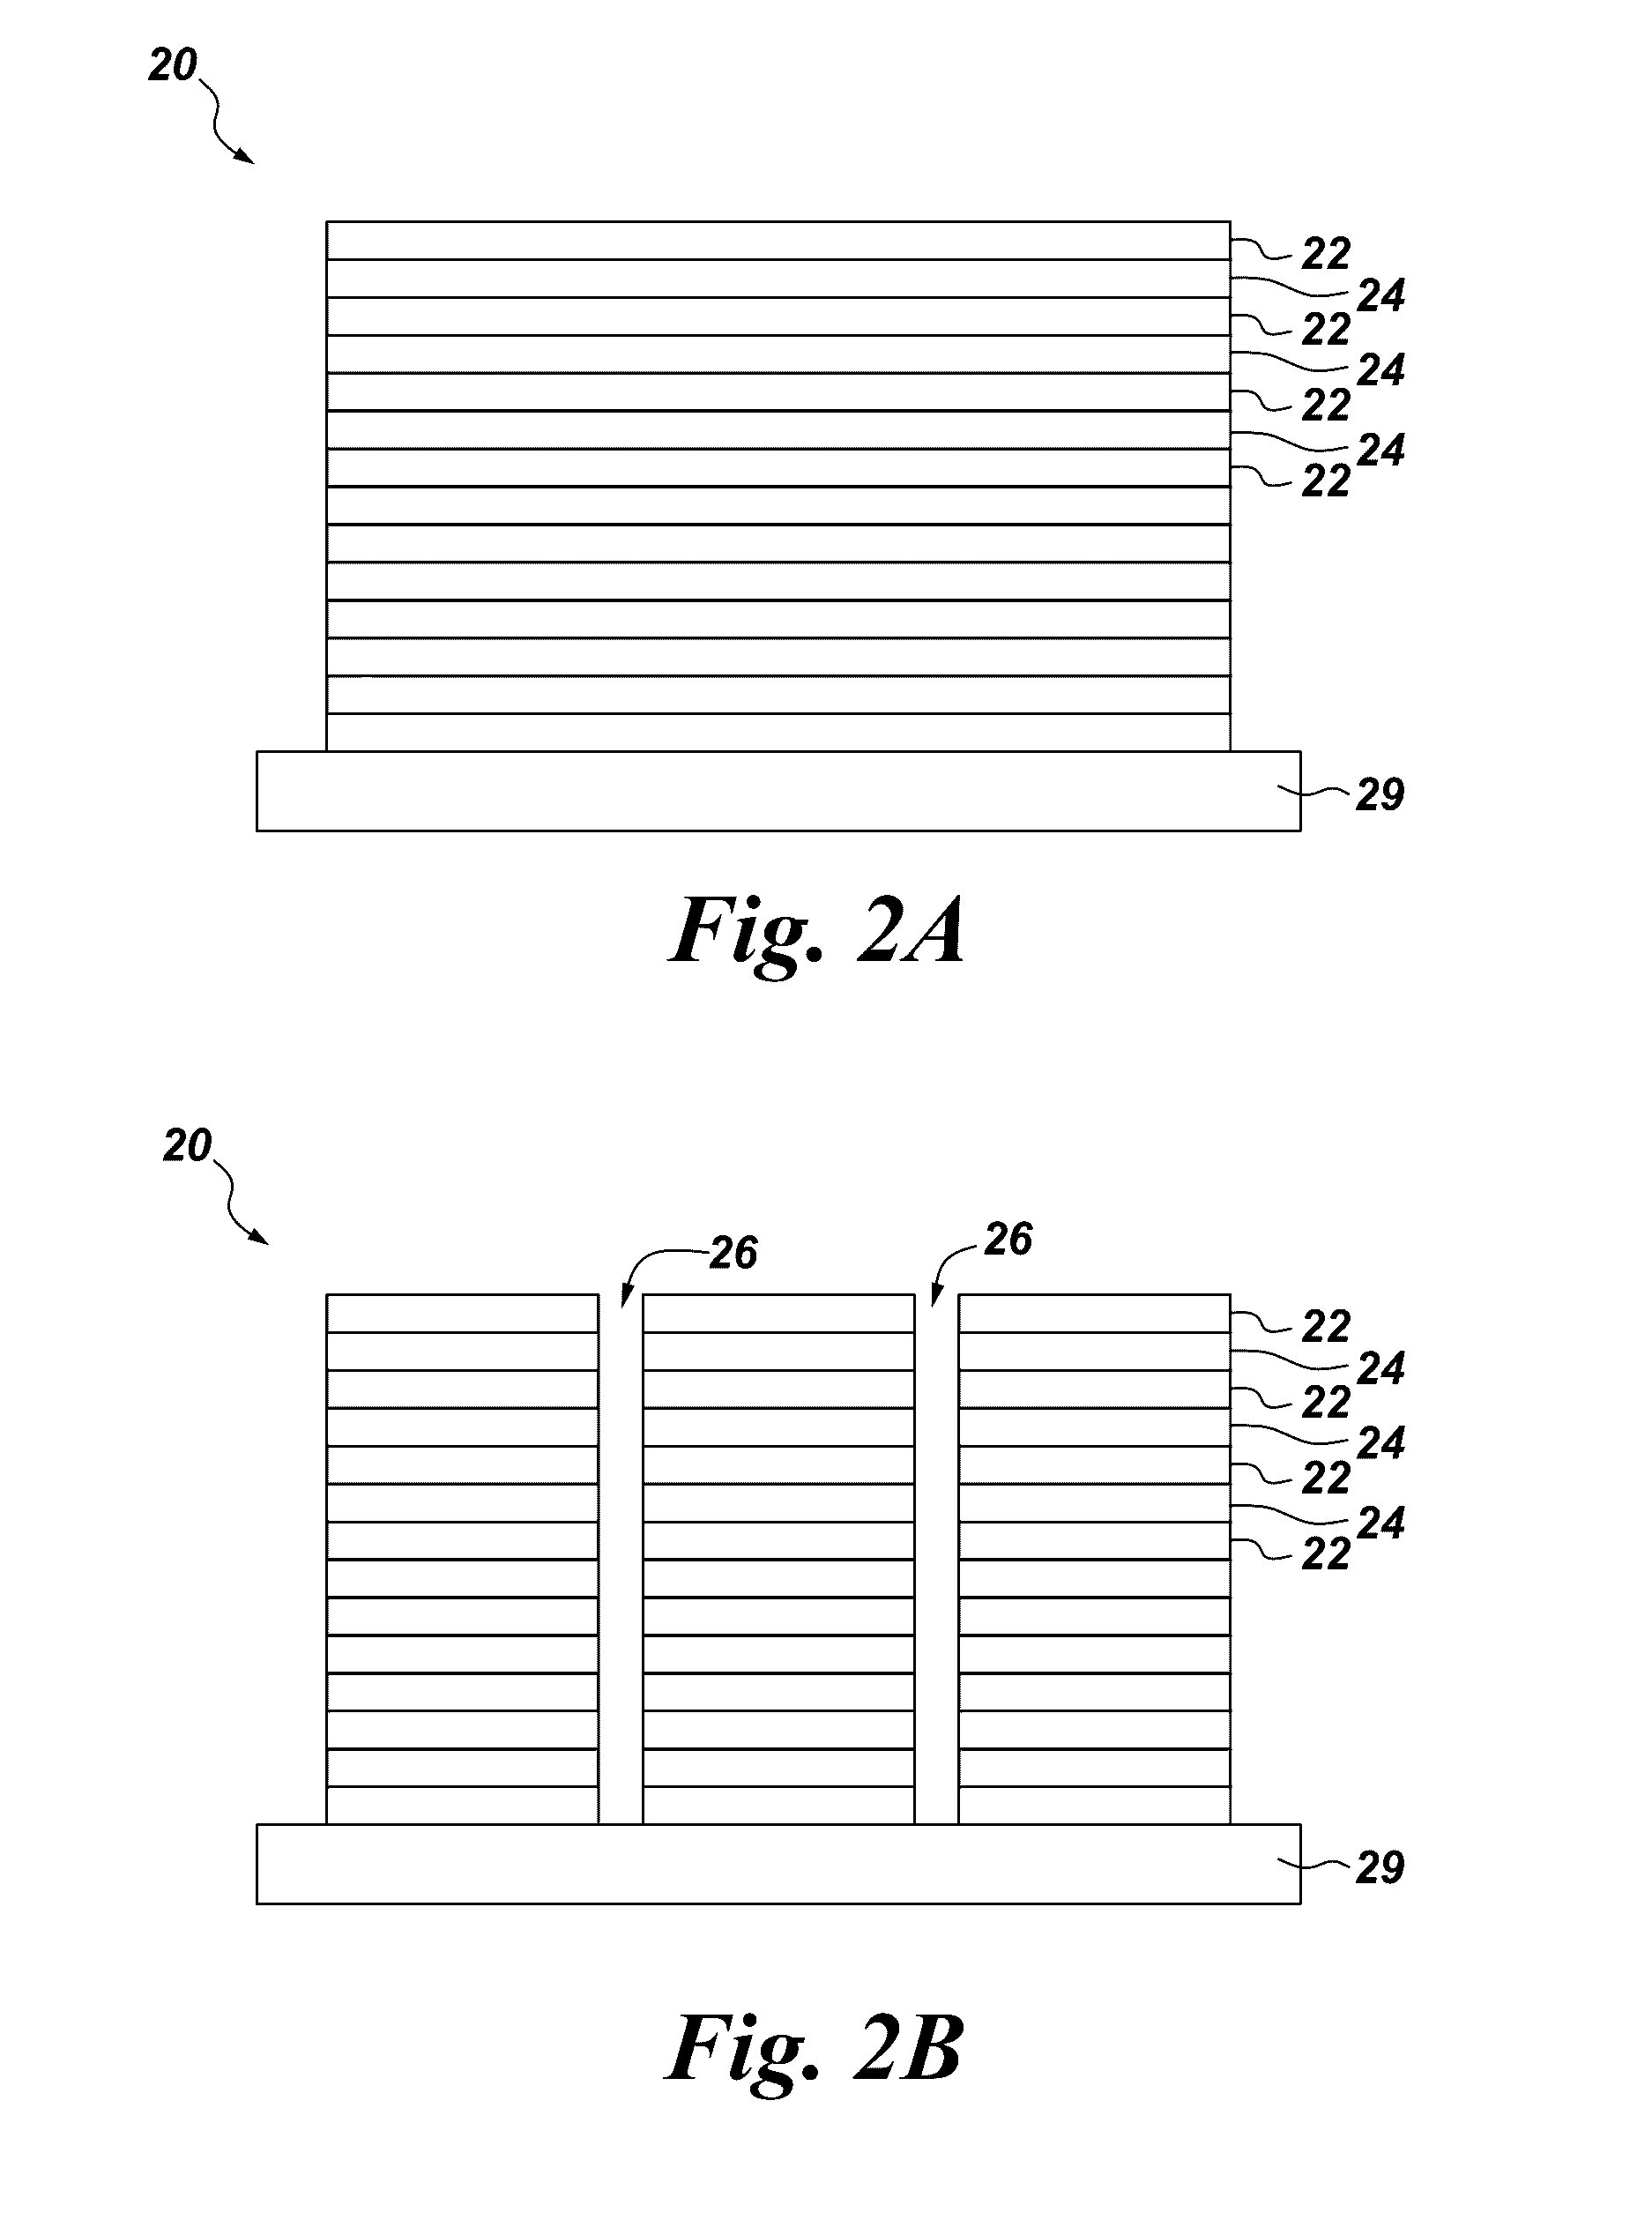 Photonic sensor for in situ selective detection of components in a fluid